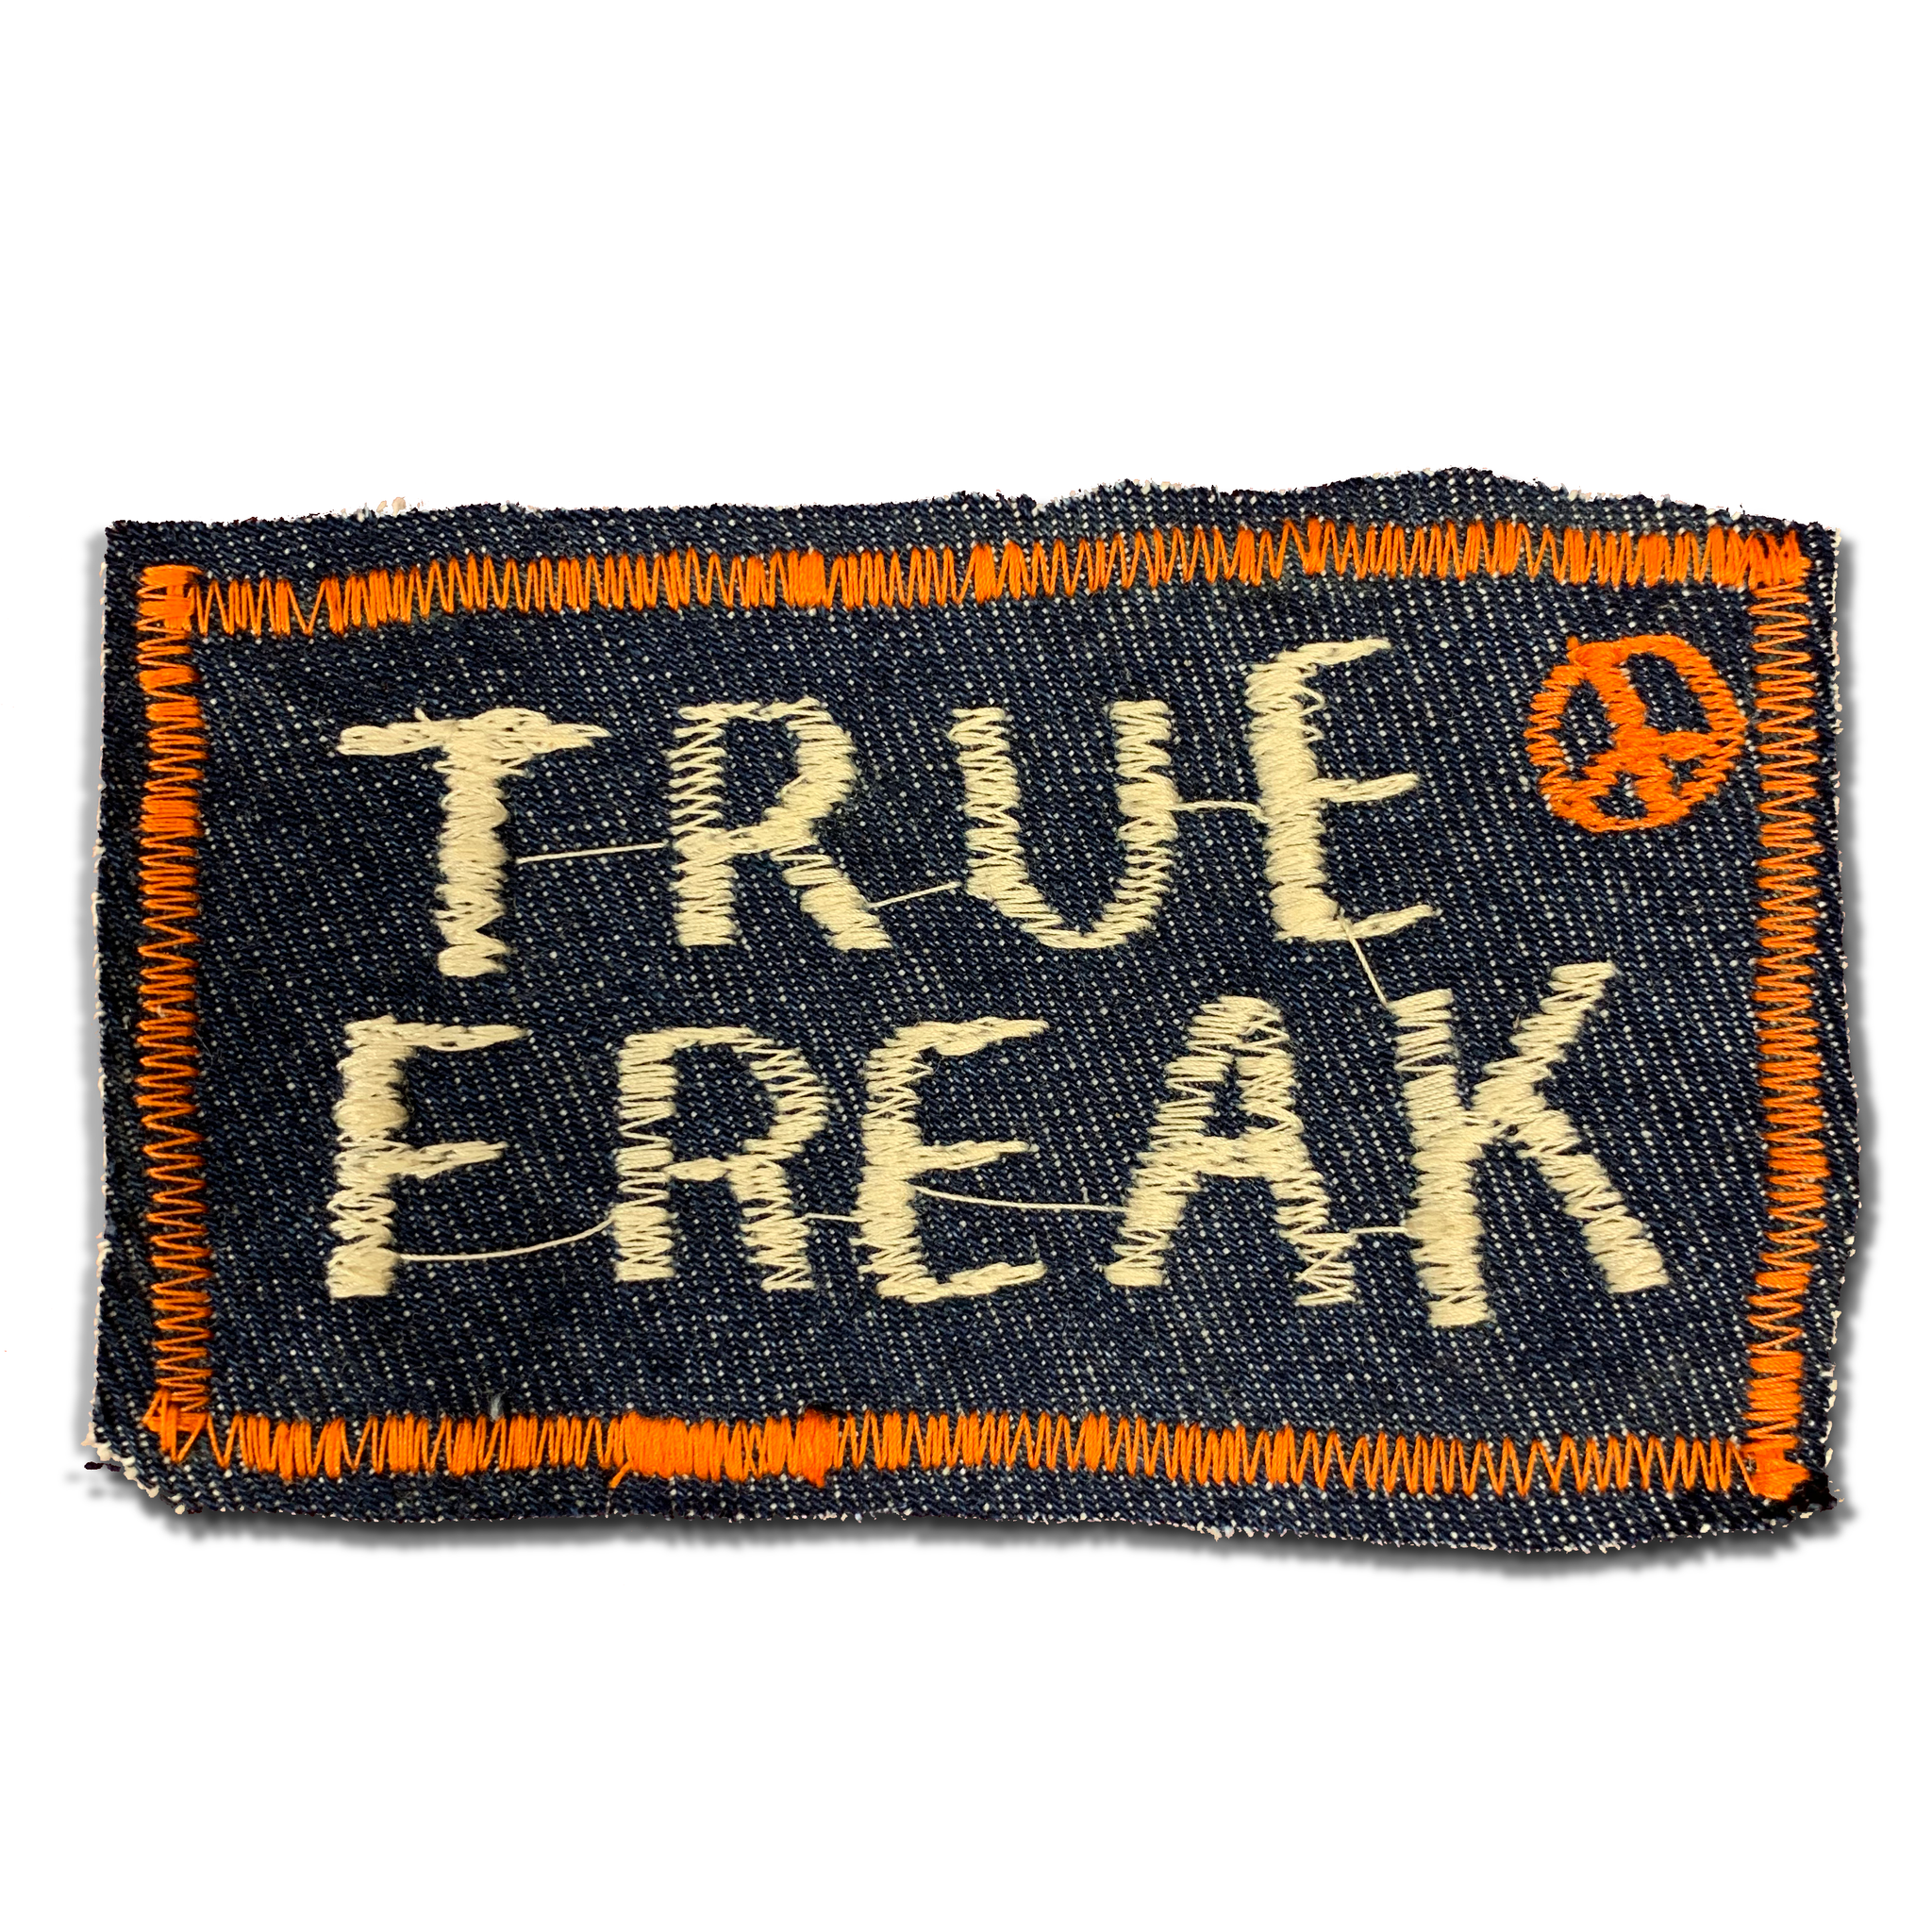 Freehand embroidered patch